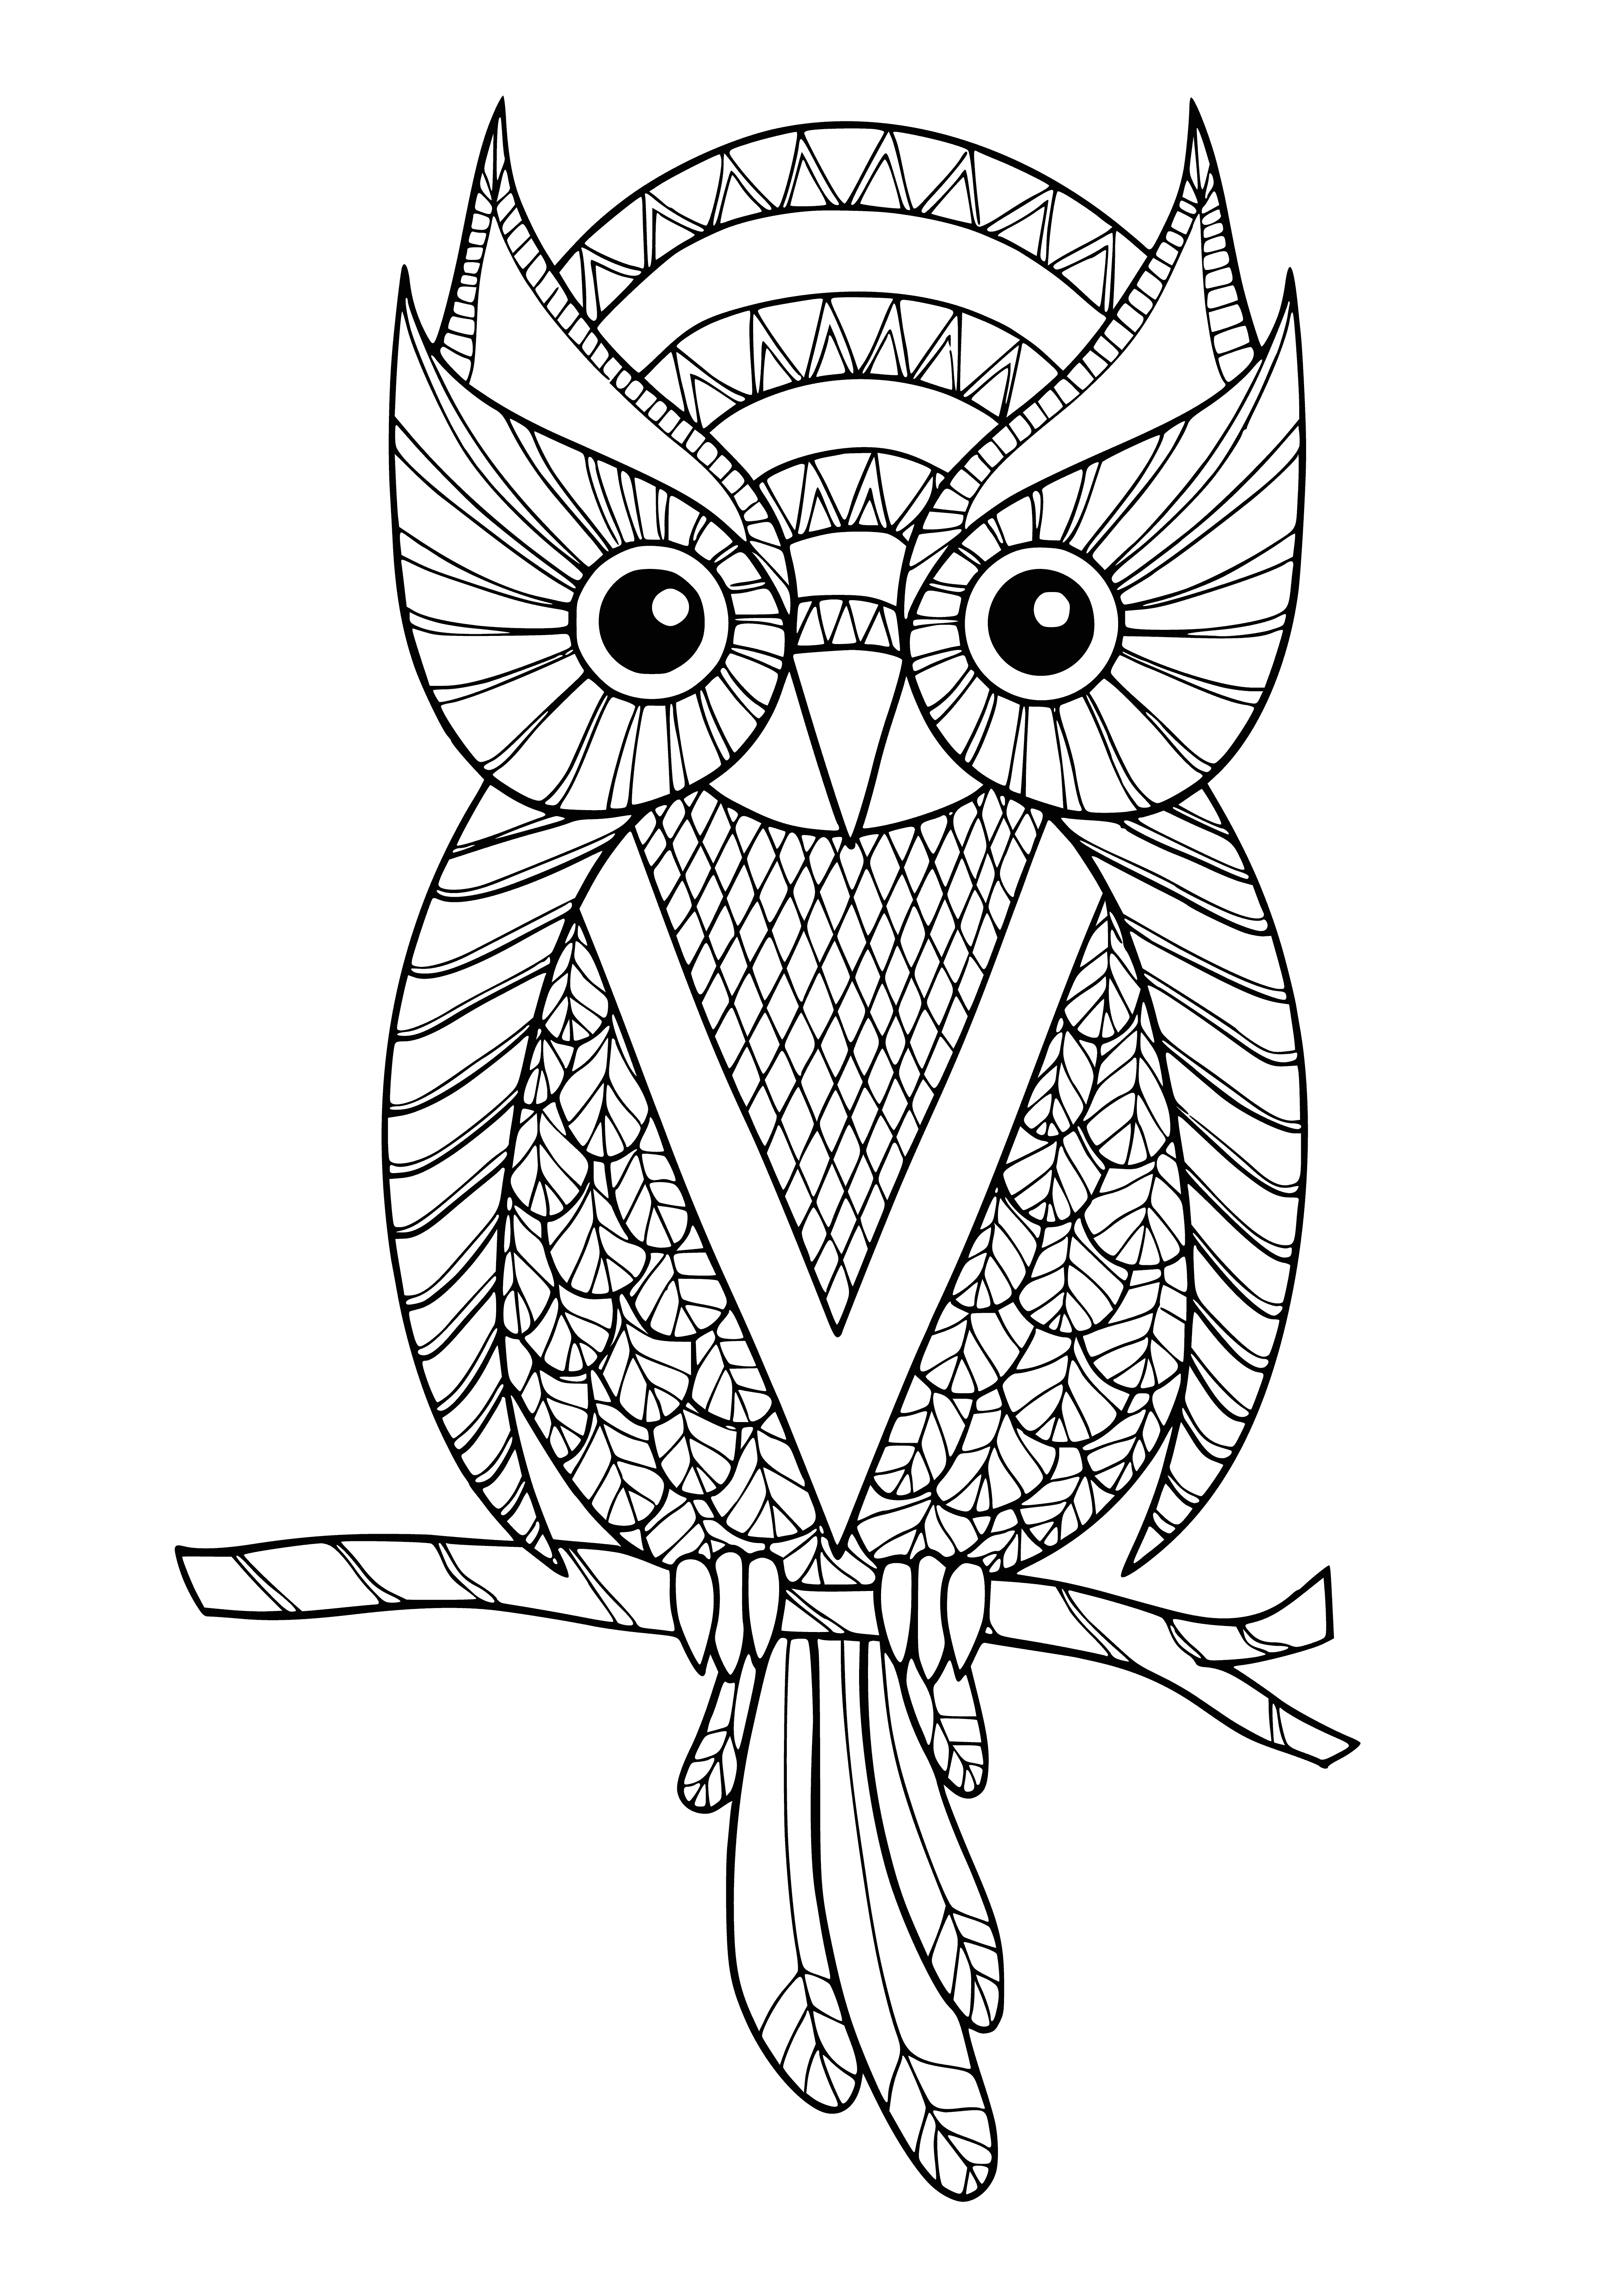 coloring page: A cute owl coloring page with big eyes and a small beak, white with brown spots and leaves around it. #ColoringPages #Owl